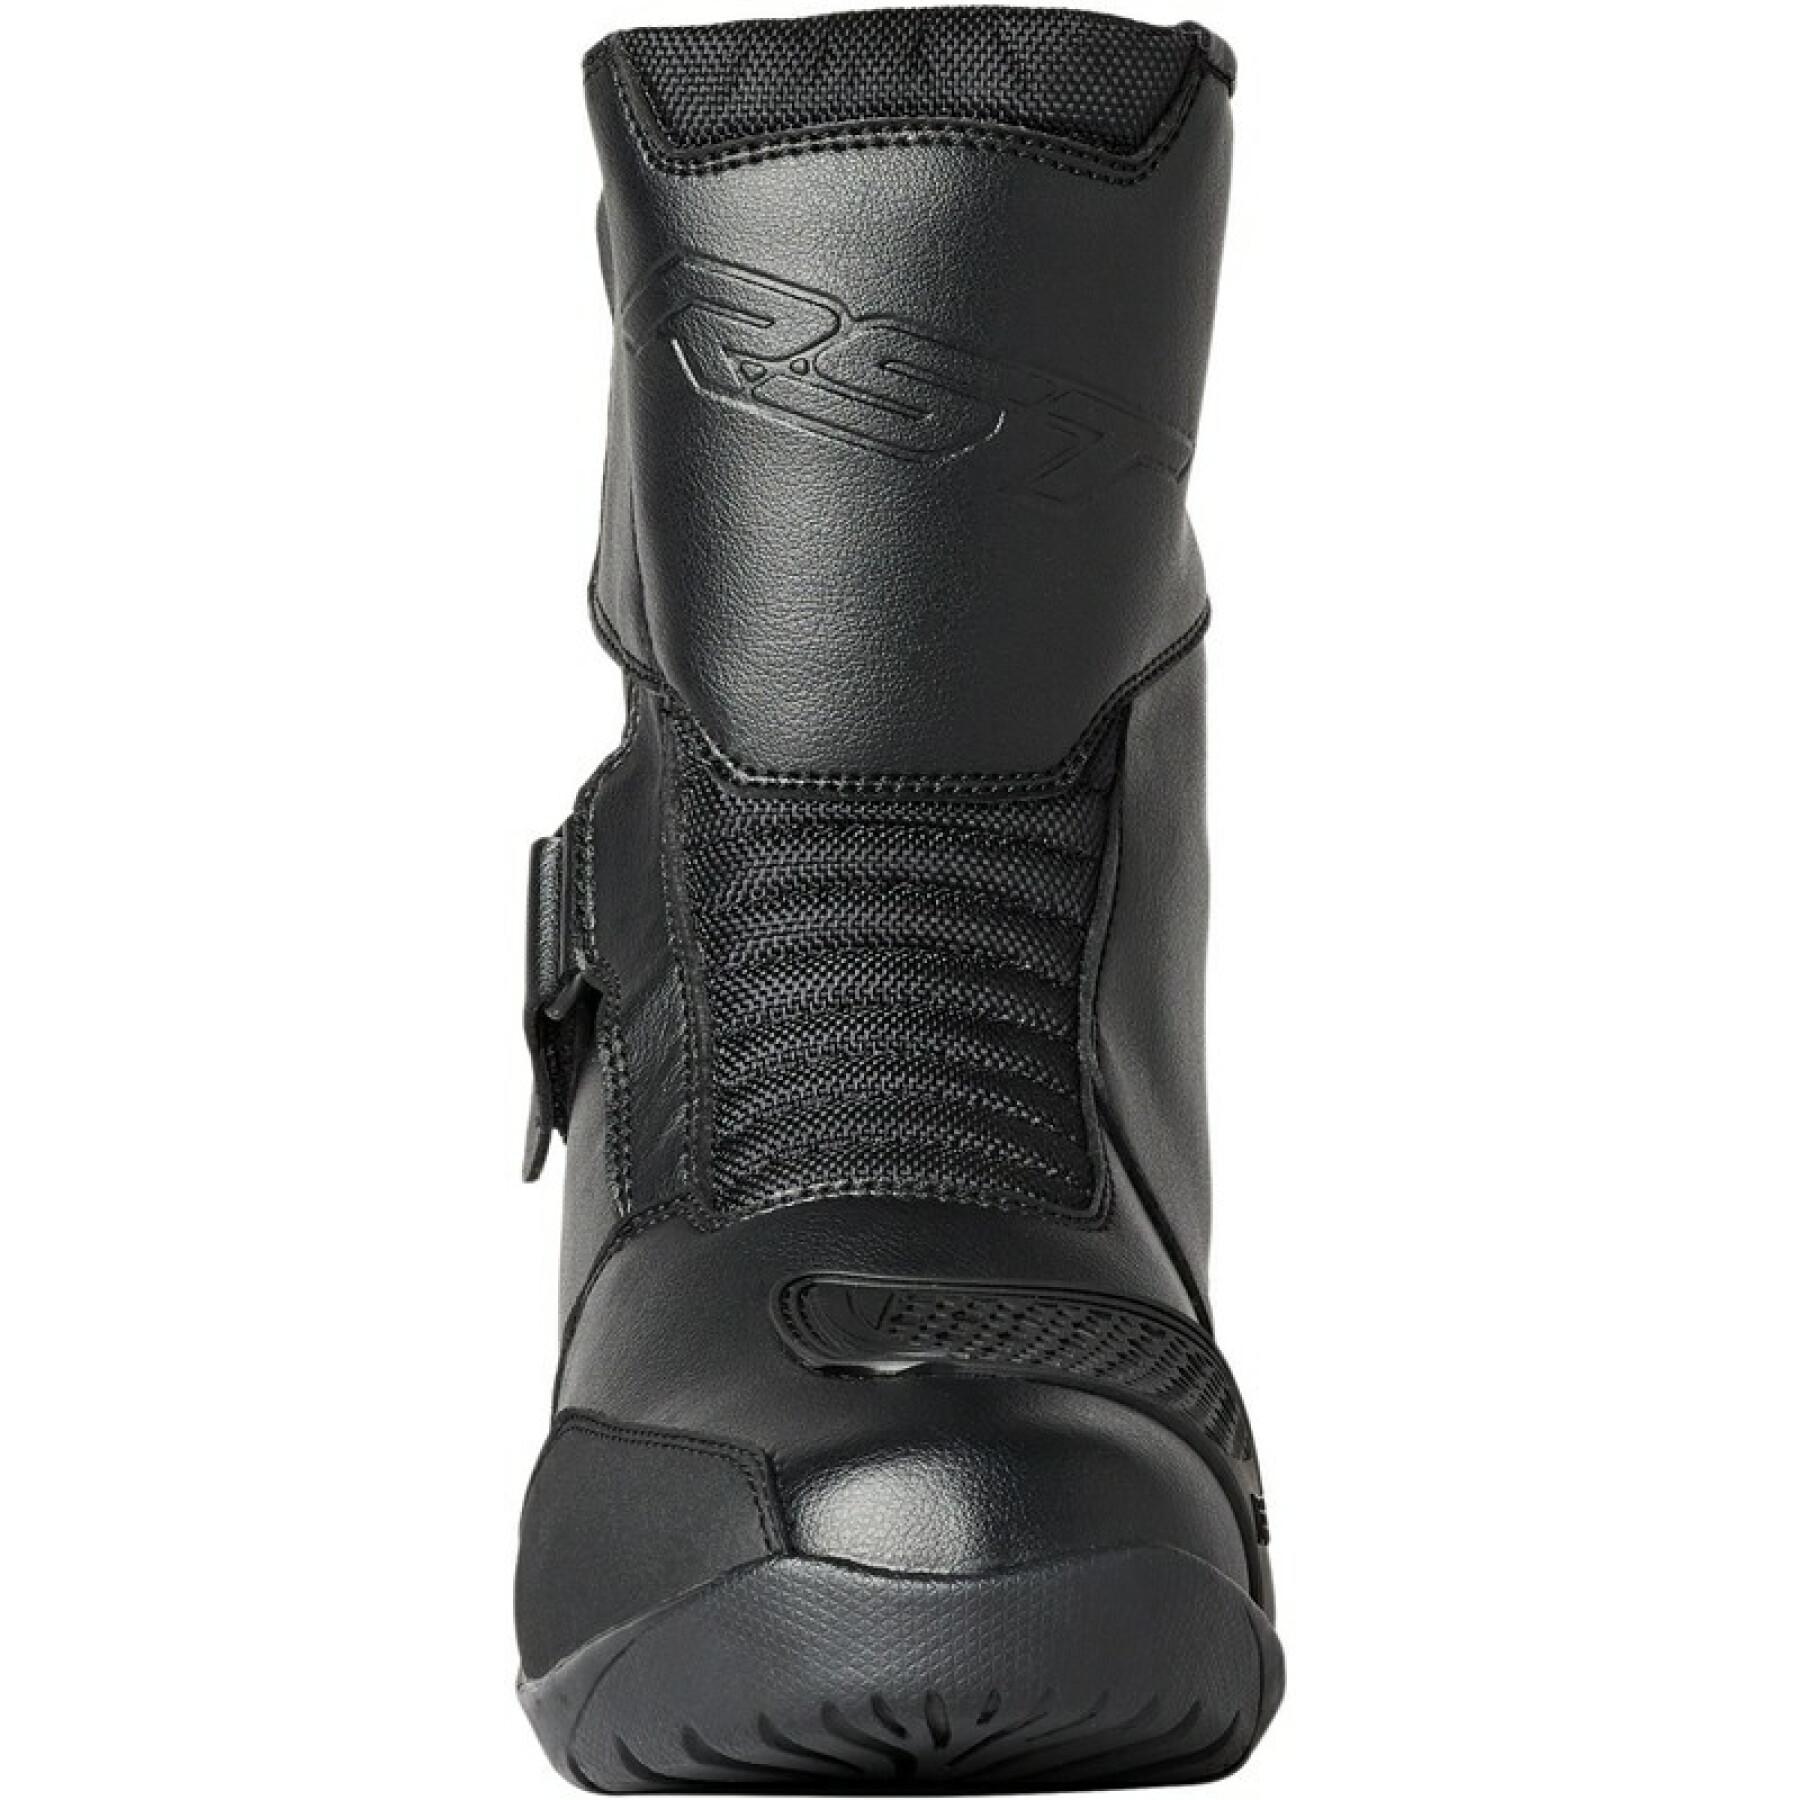 Motorcycle boots RST Axiom mid waterproof CE